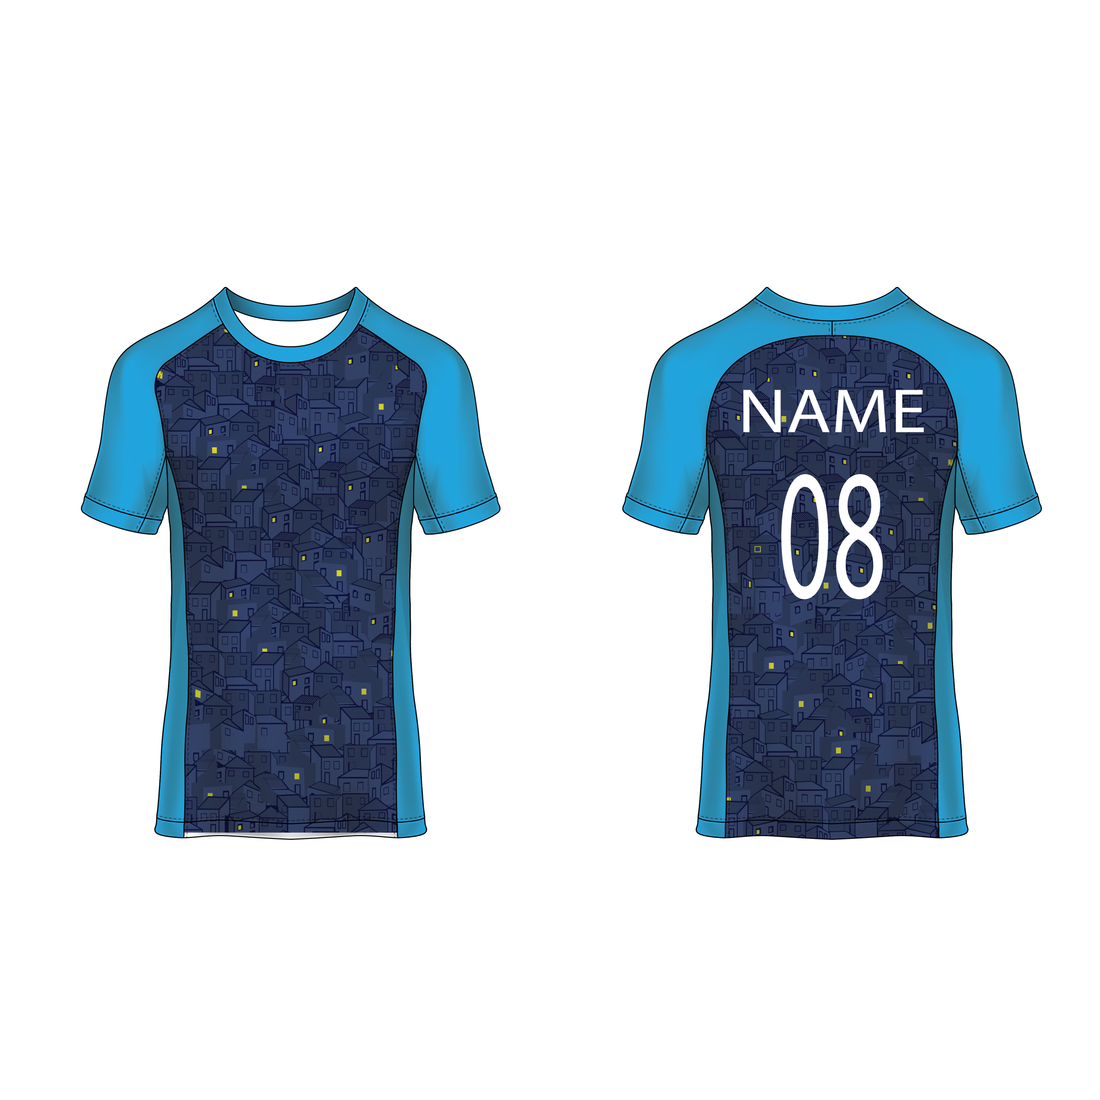 NEXT PRINT All Over Printed Customized Sublimation T-Shirt Unisex Sports Jersey Player Name & Number, Team Name NP50000263